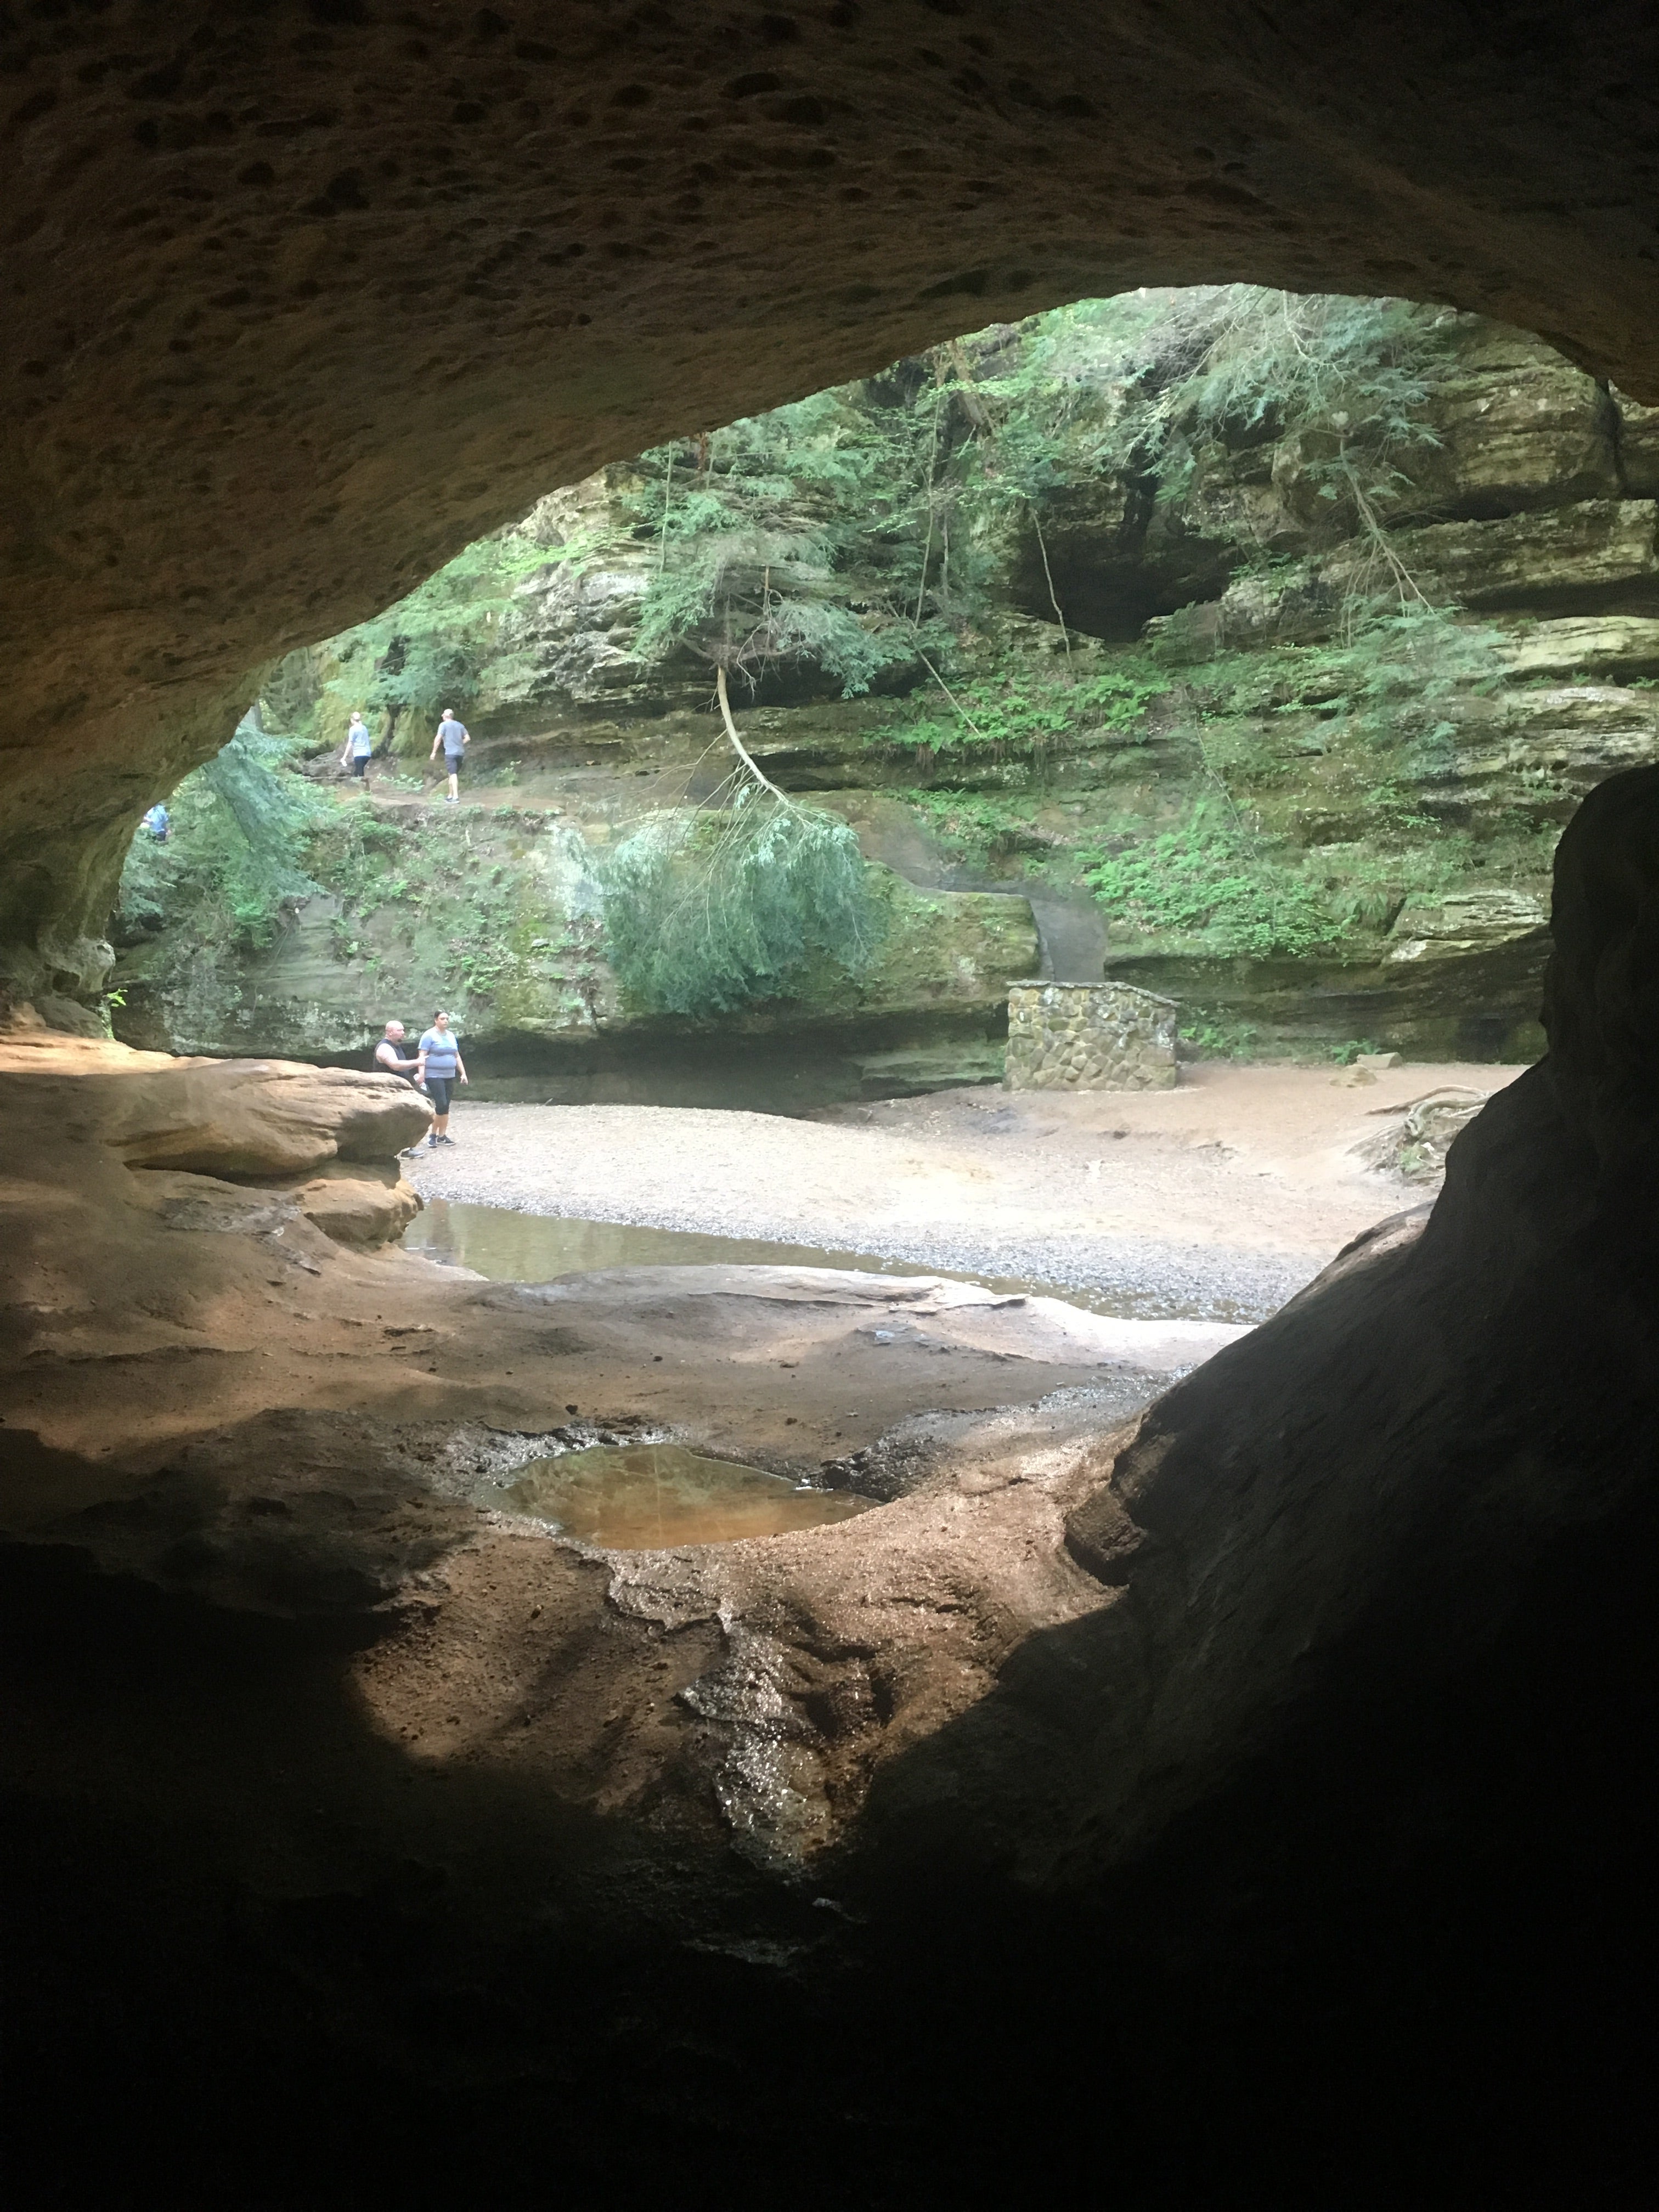 Camper submitted image from Hocking Hills State Park - 5